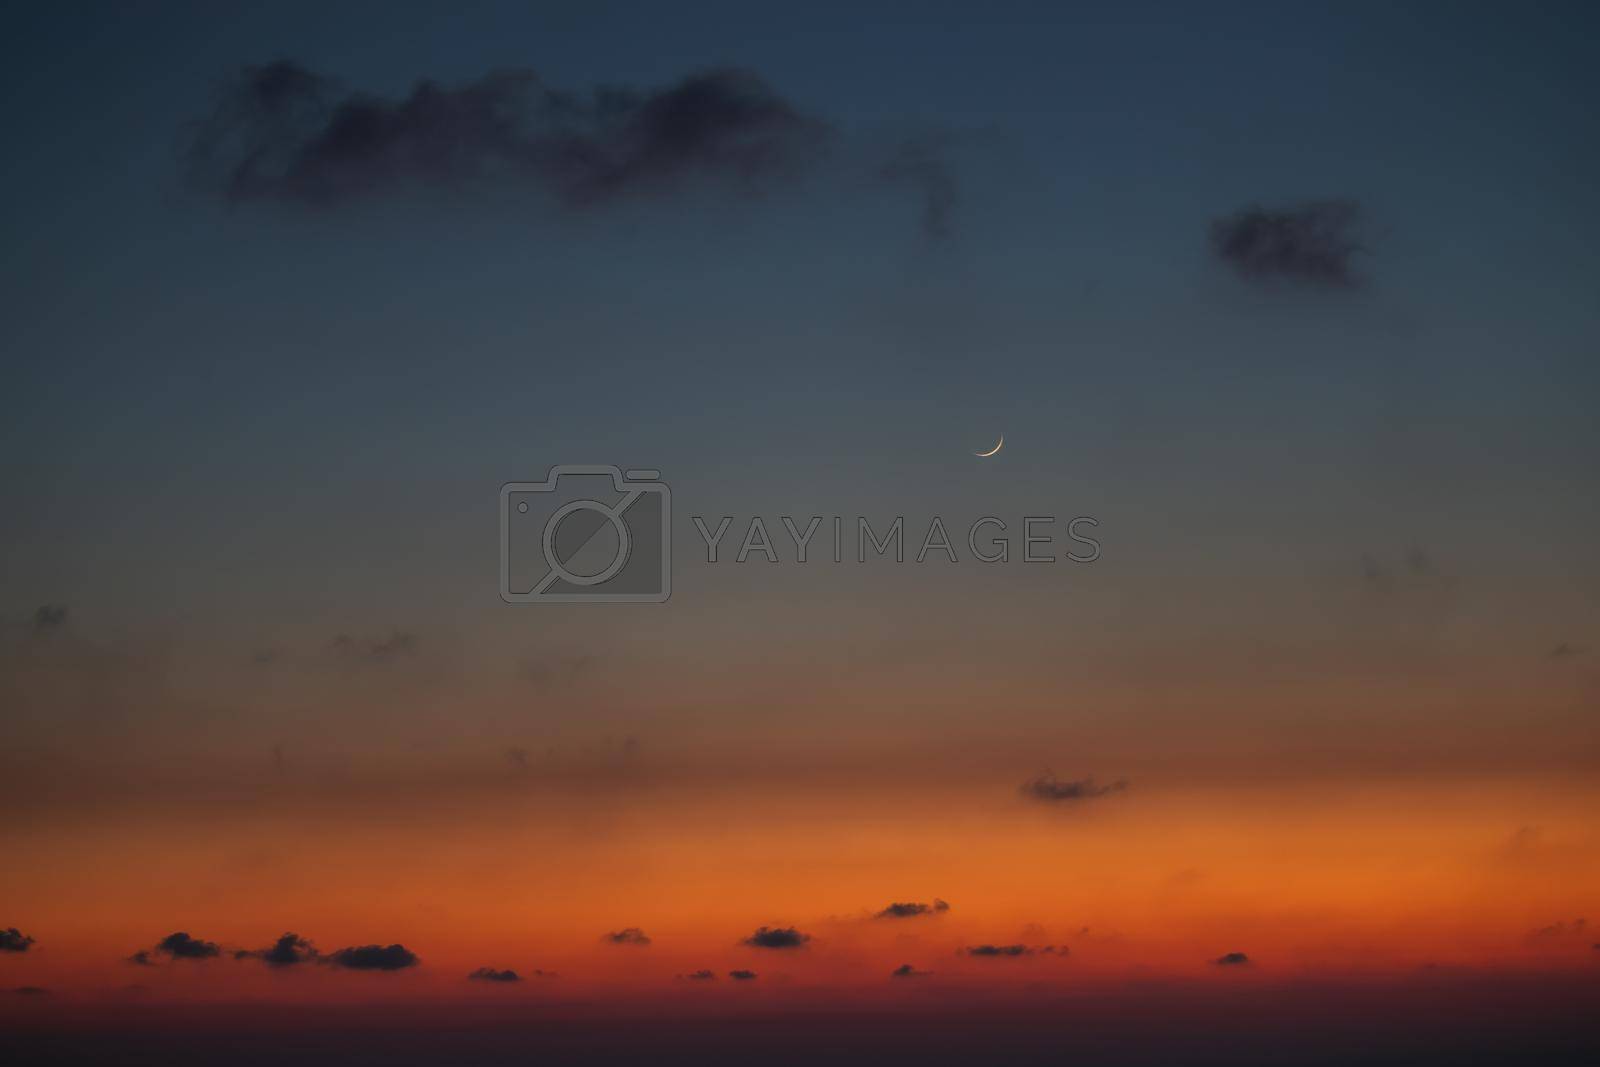 Royalty free image of Beautiful Sunset and Moon by Anna_Omelchenko